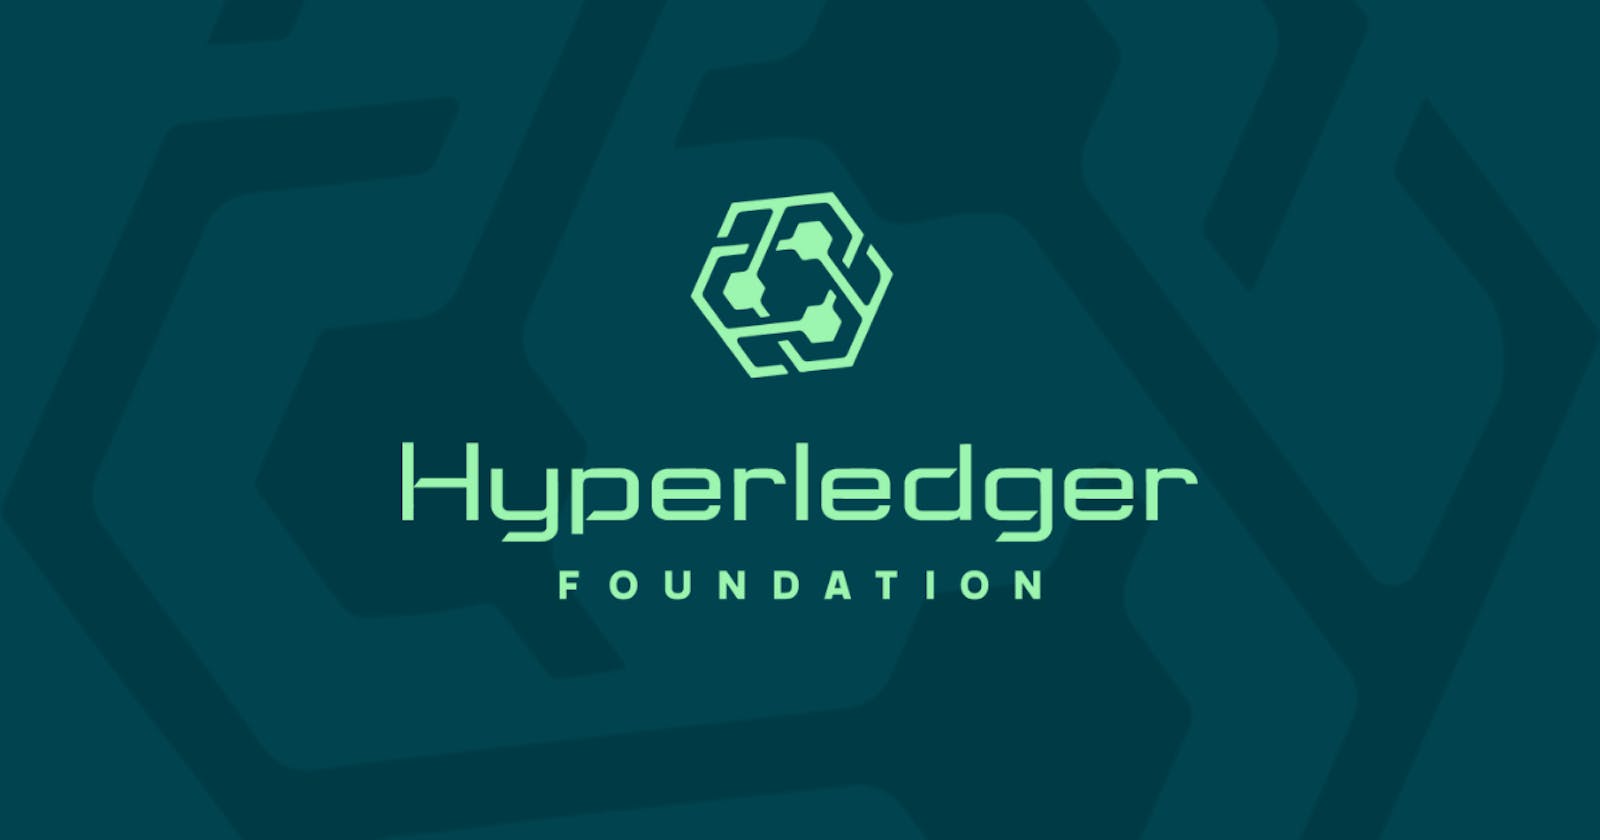 My LFX Mentee Experience with Hyperledger Foundation